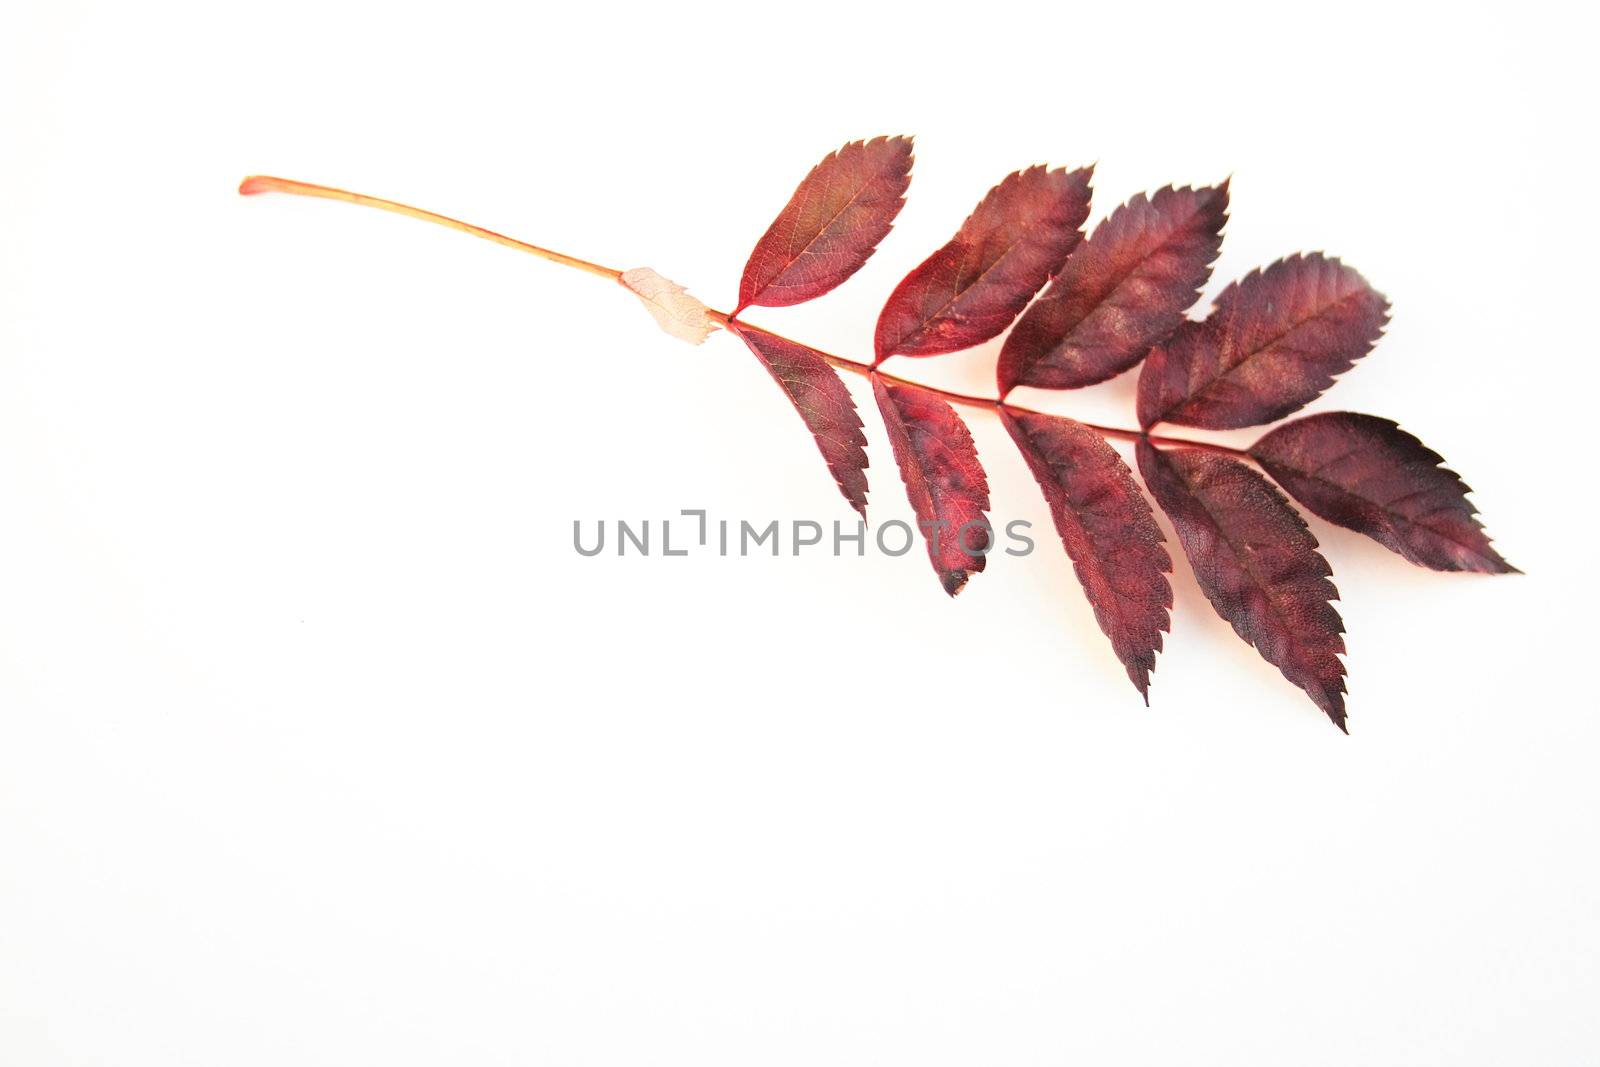 assorted autumn leaves over a white background